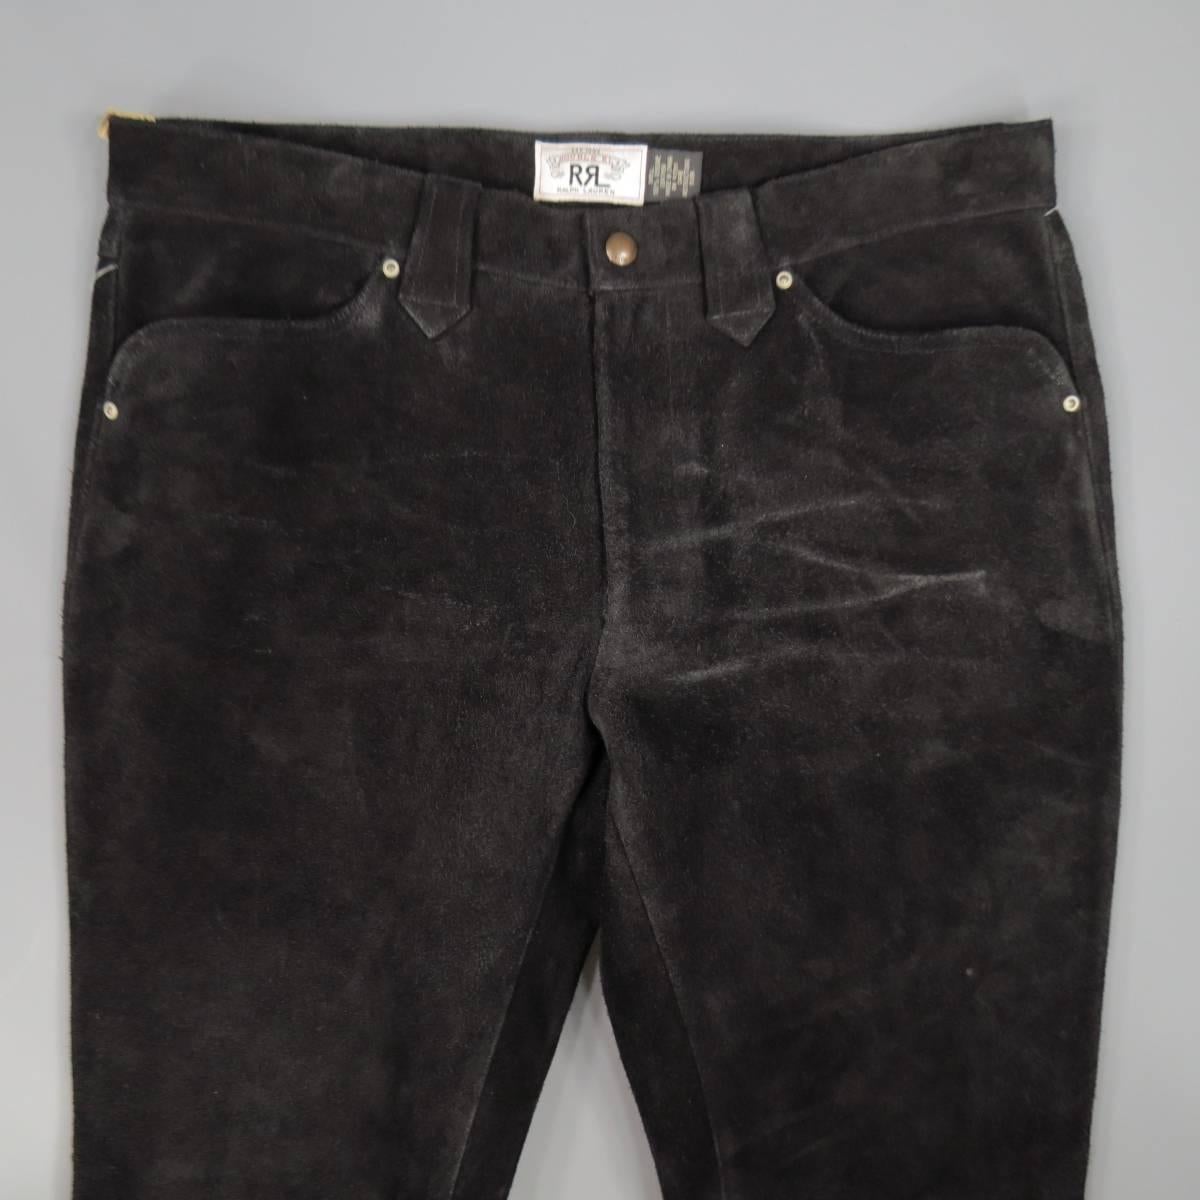 RRL by RALPH LAUREN Casual Pants consists of 100% suede material in a black color tone. Designed with a zip-fly button closure, quarter side pockets, tone-on-tone stitching throughout body. Western style detail, fringe edging toward leg hemming with